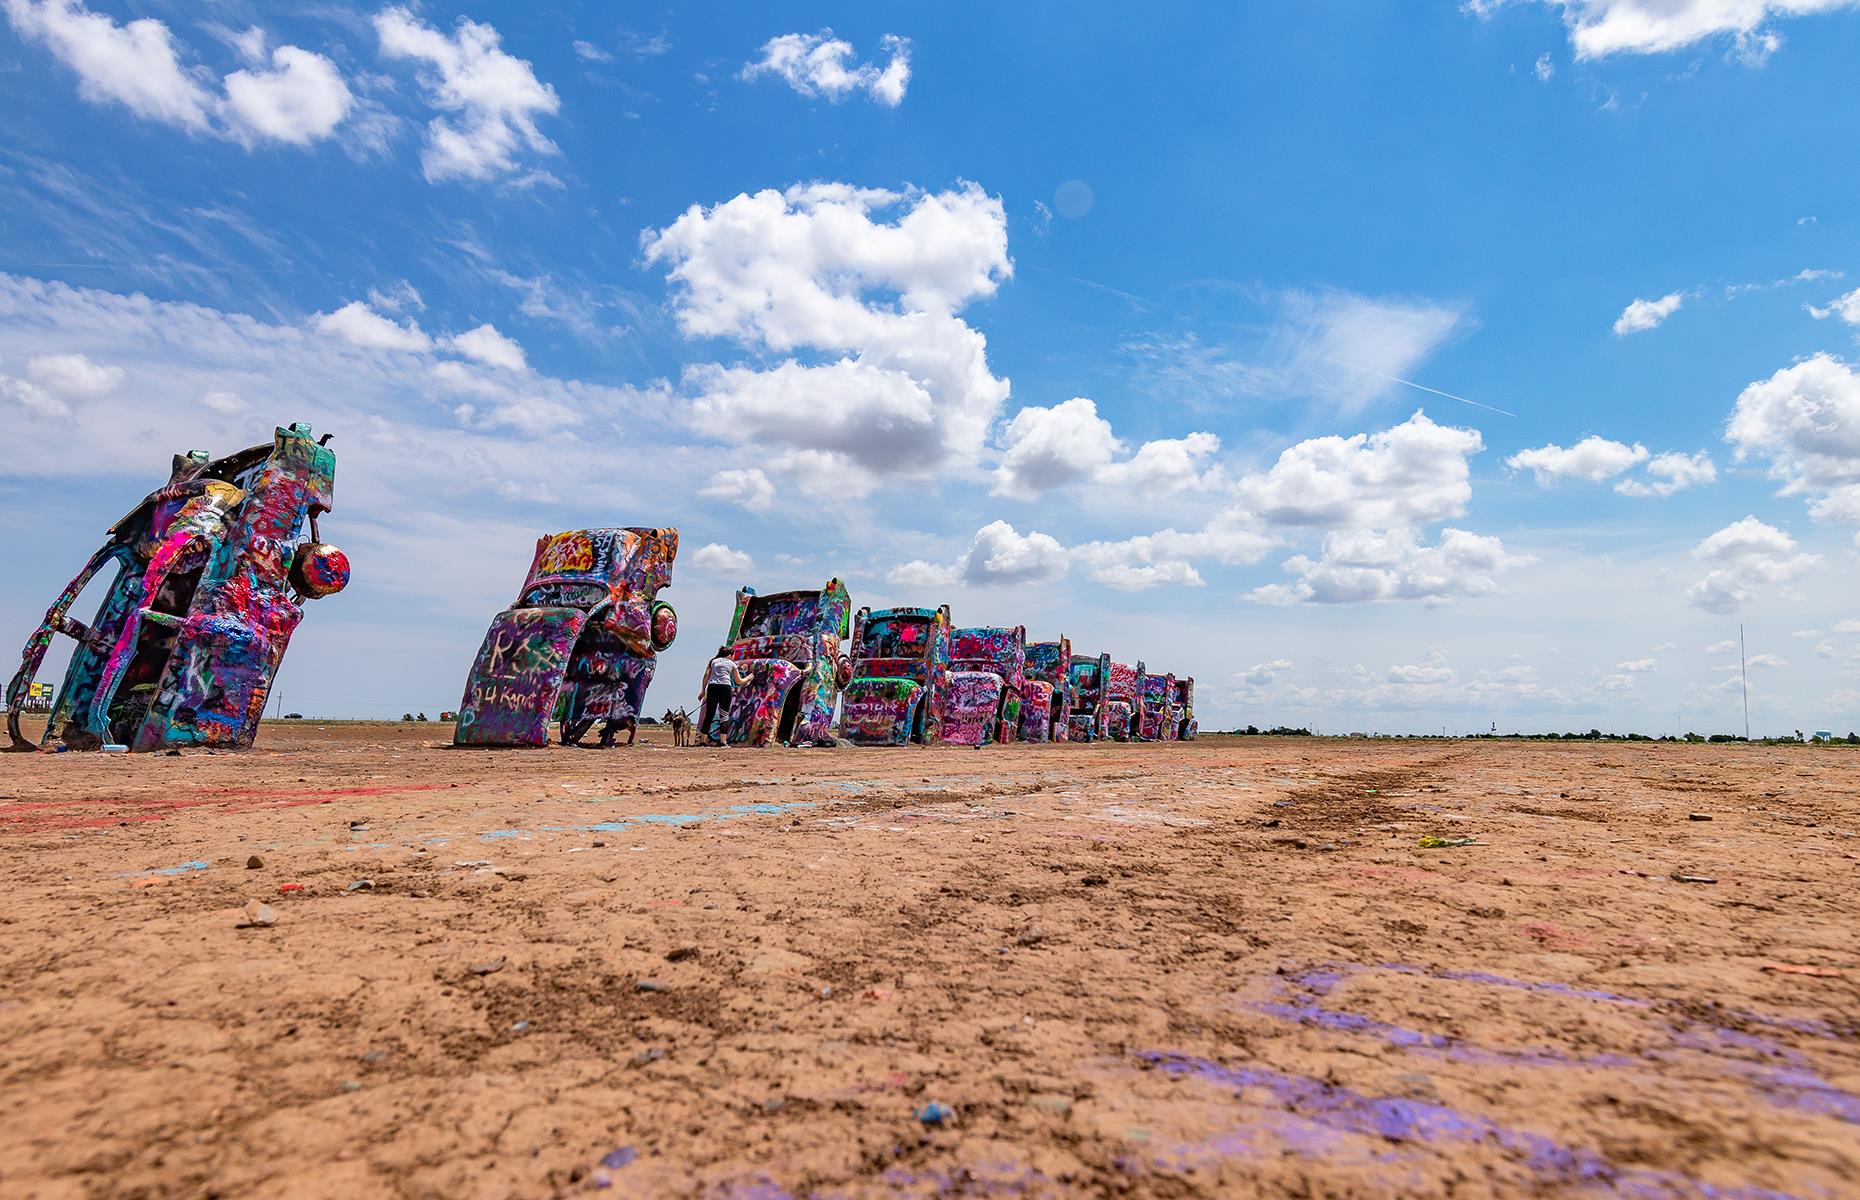 <p>Fun and sometimes bizarre roadside attractions are huge in the US and Texas sure does have some of the best. Cadillac Ranch, just outside of Amarillo in northern Texas, is an art installation that consists of a series of upturned cars painted in bright colors and psychedelic-like patterns. Installed in 1974, using 10 junk Cadillacs, it's now become a popular tourist attraction in this area.</p>  <p><strong><a href="https://www.loveexploring.com/gallerylist/65669/32-unusual-things-youll-find-on-a-road-trip-through-the-usa">Here are more unusual things you'll find on a road trip through the USA</a></strong></p>